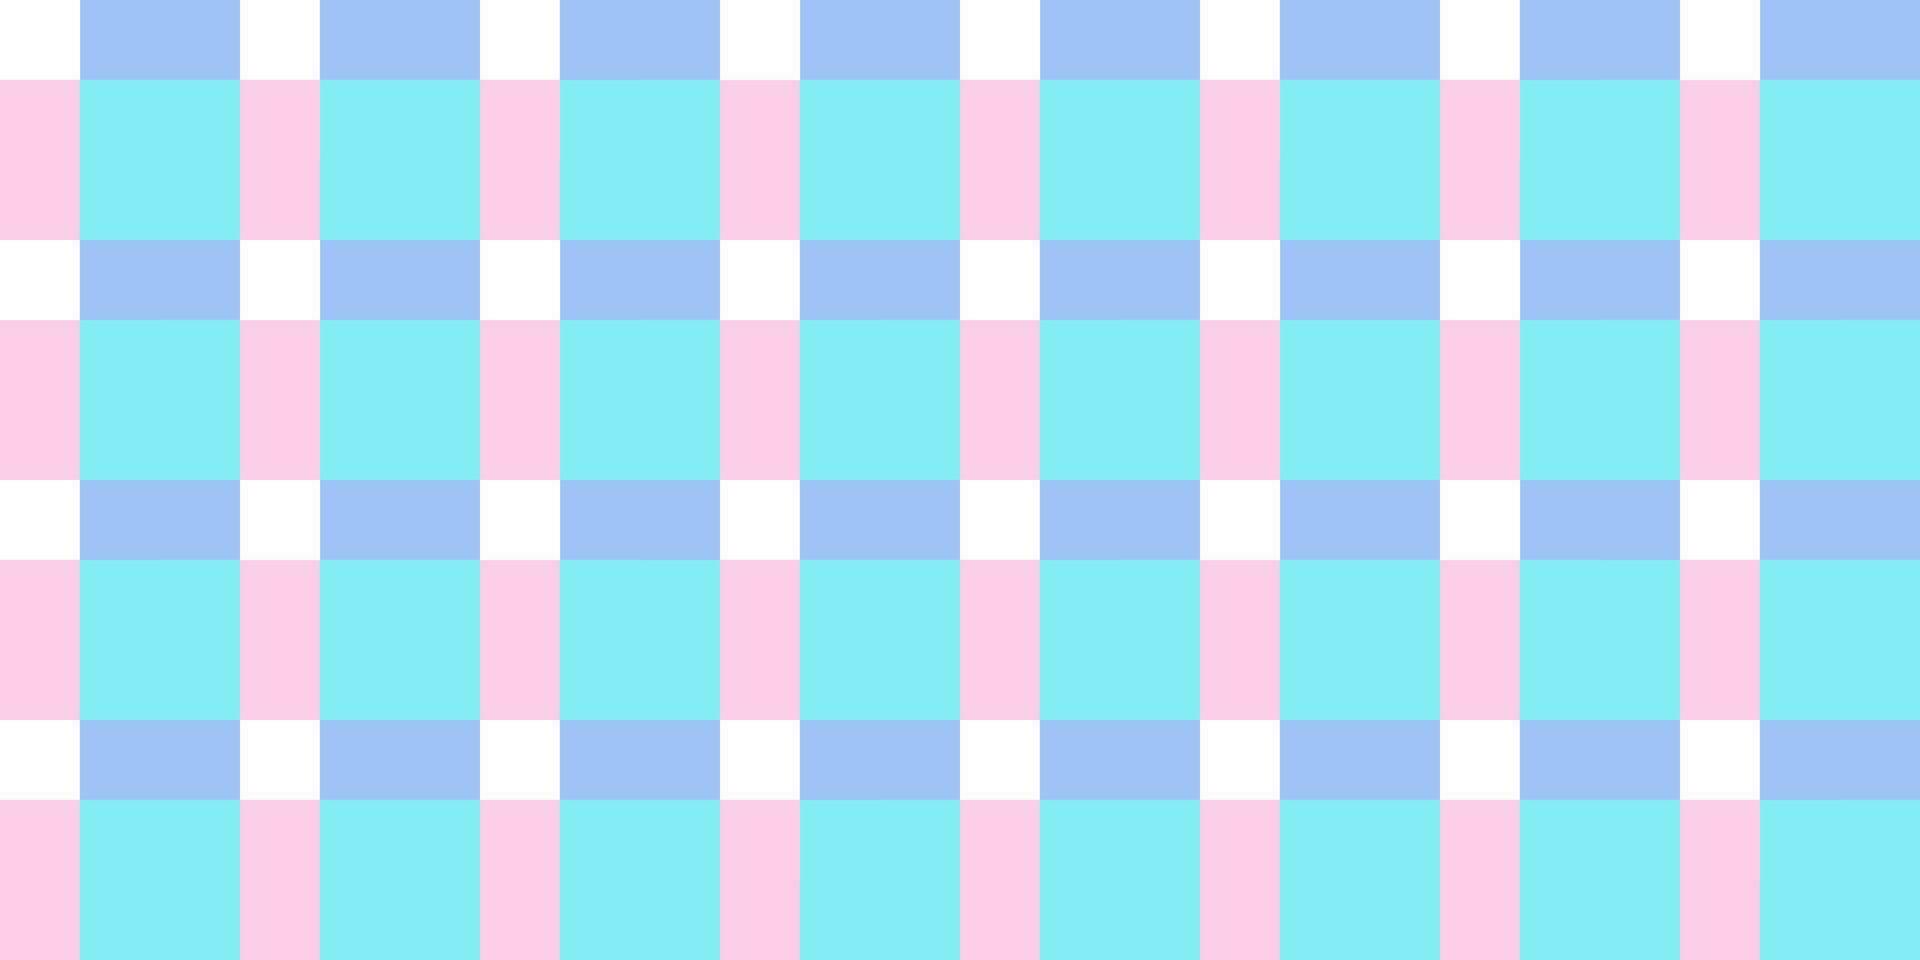 Vichy seamless pattern in pastel colors for pink doll. Gingham design Birthday, Easter holiday textile decorative. Vector check plaid patterns for fabric - picnic blanket, tablecloth, dress, napkin.